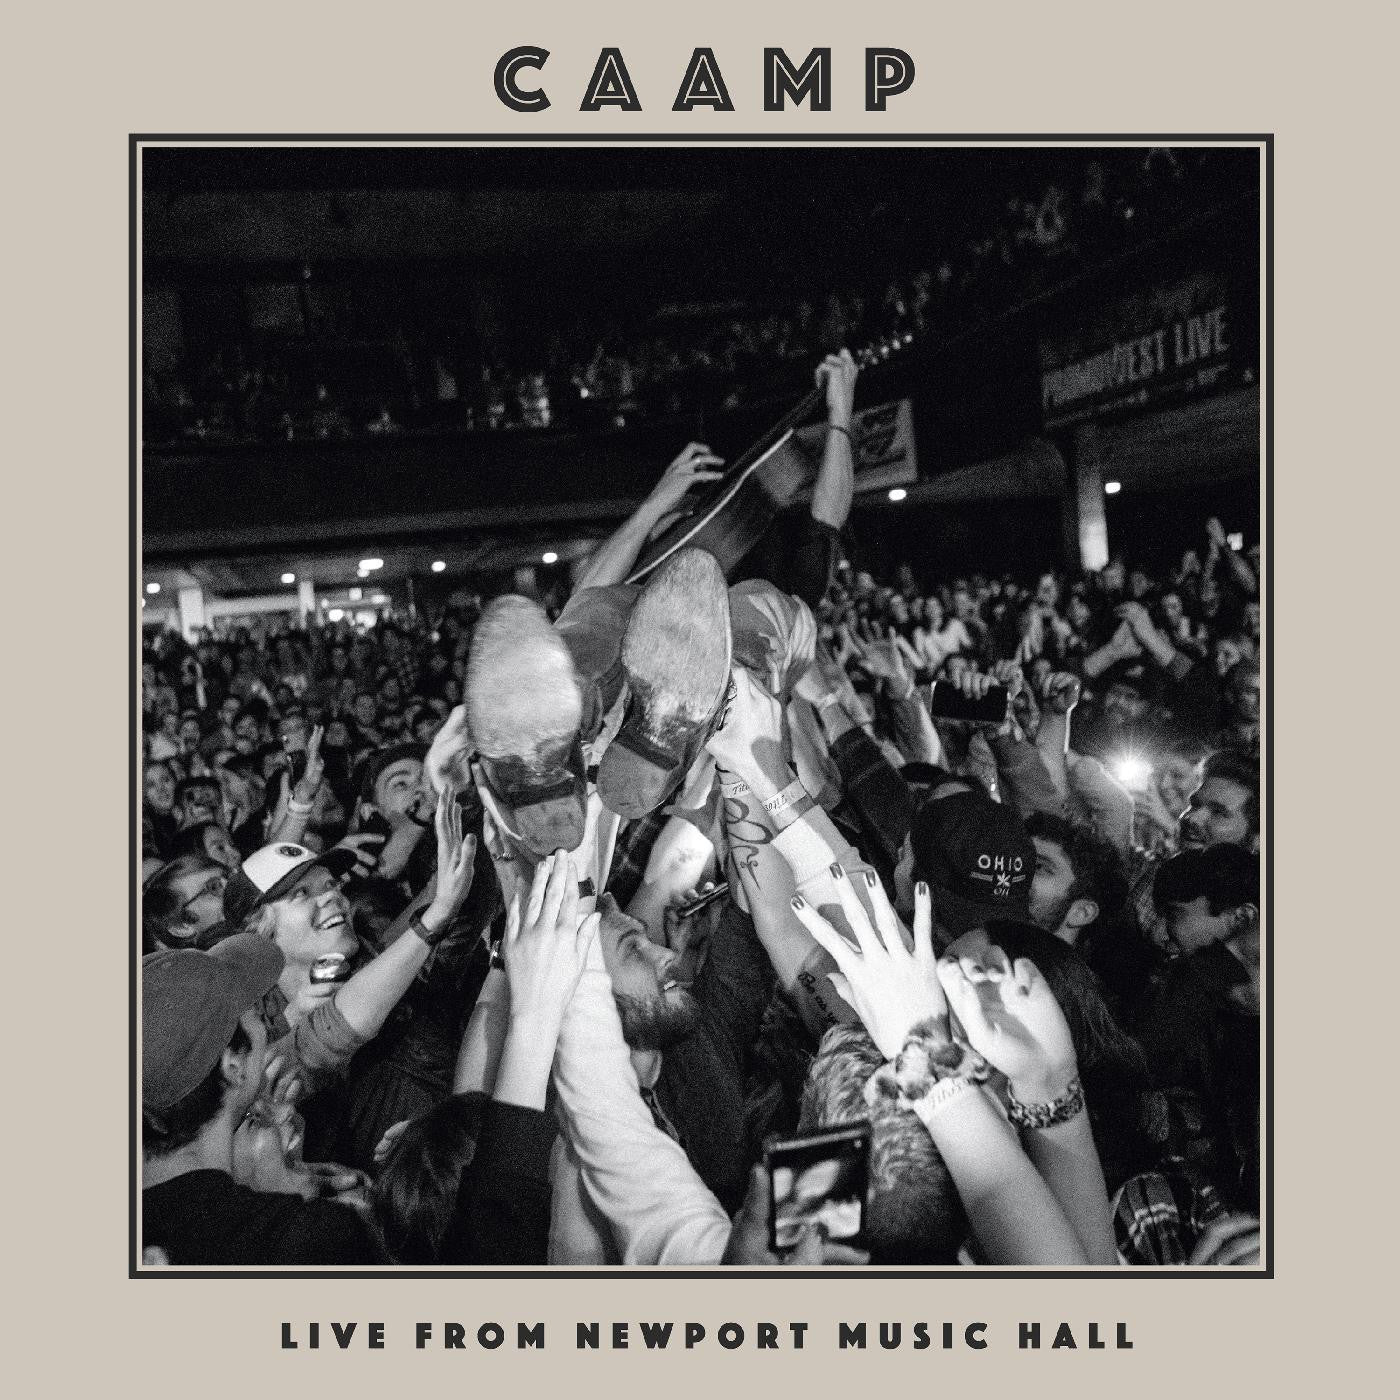 Caamp - Live From Newport Music Hall (Clear Vinyl LP)